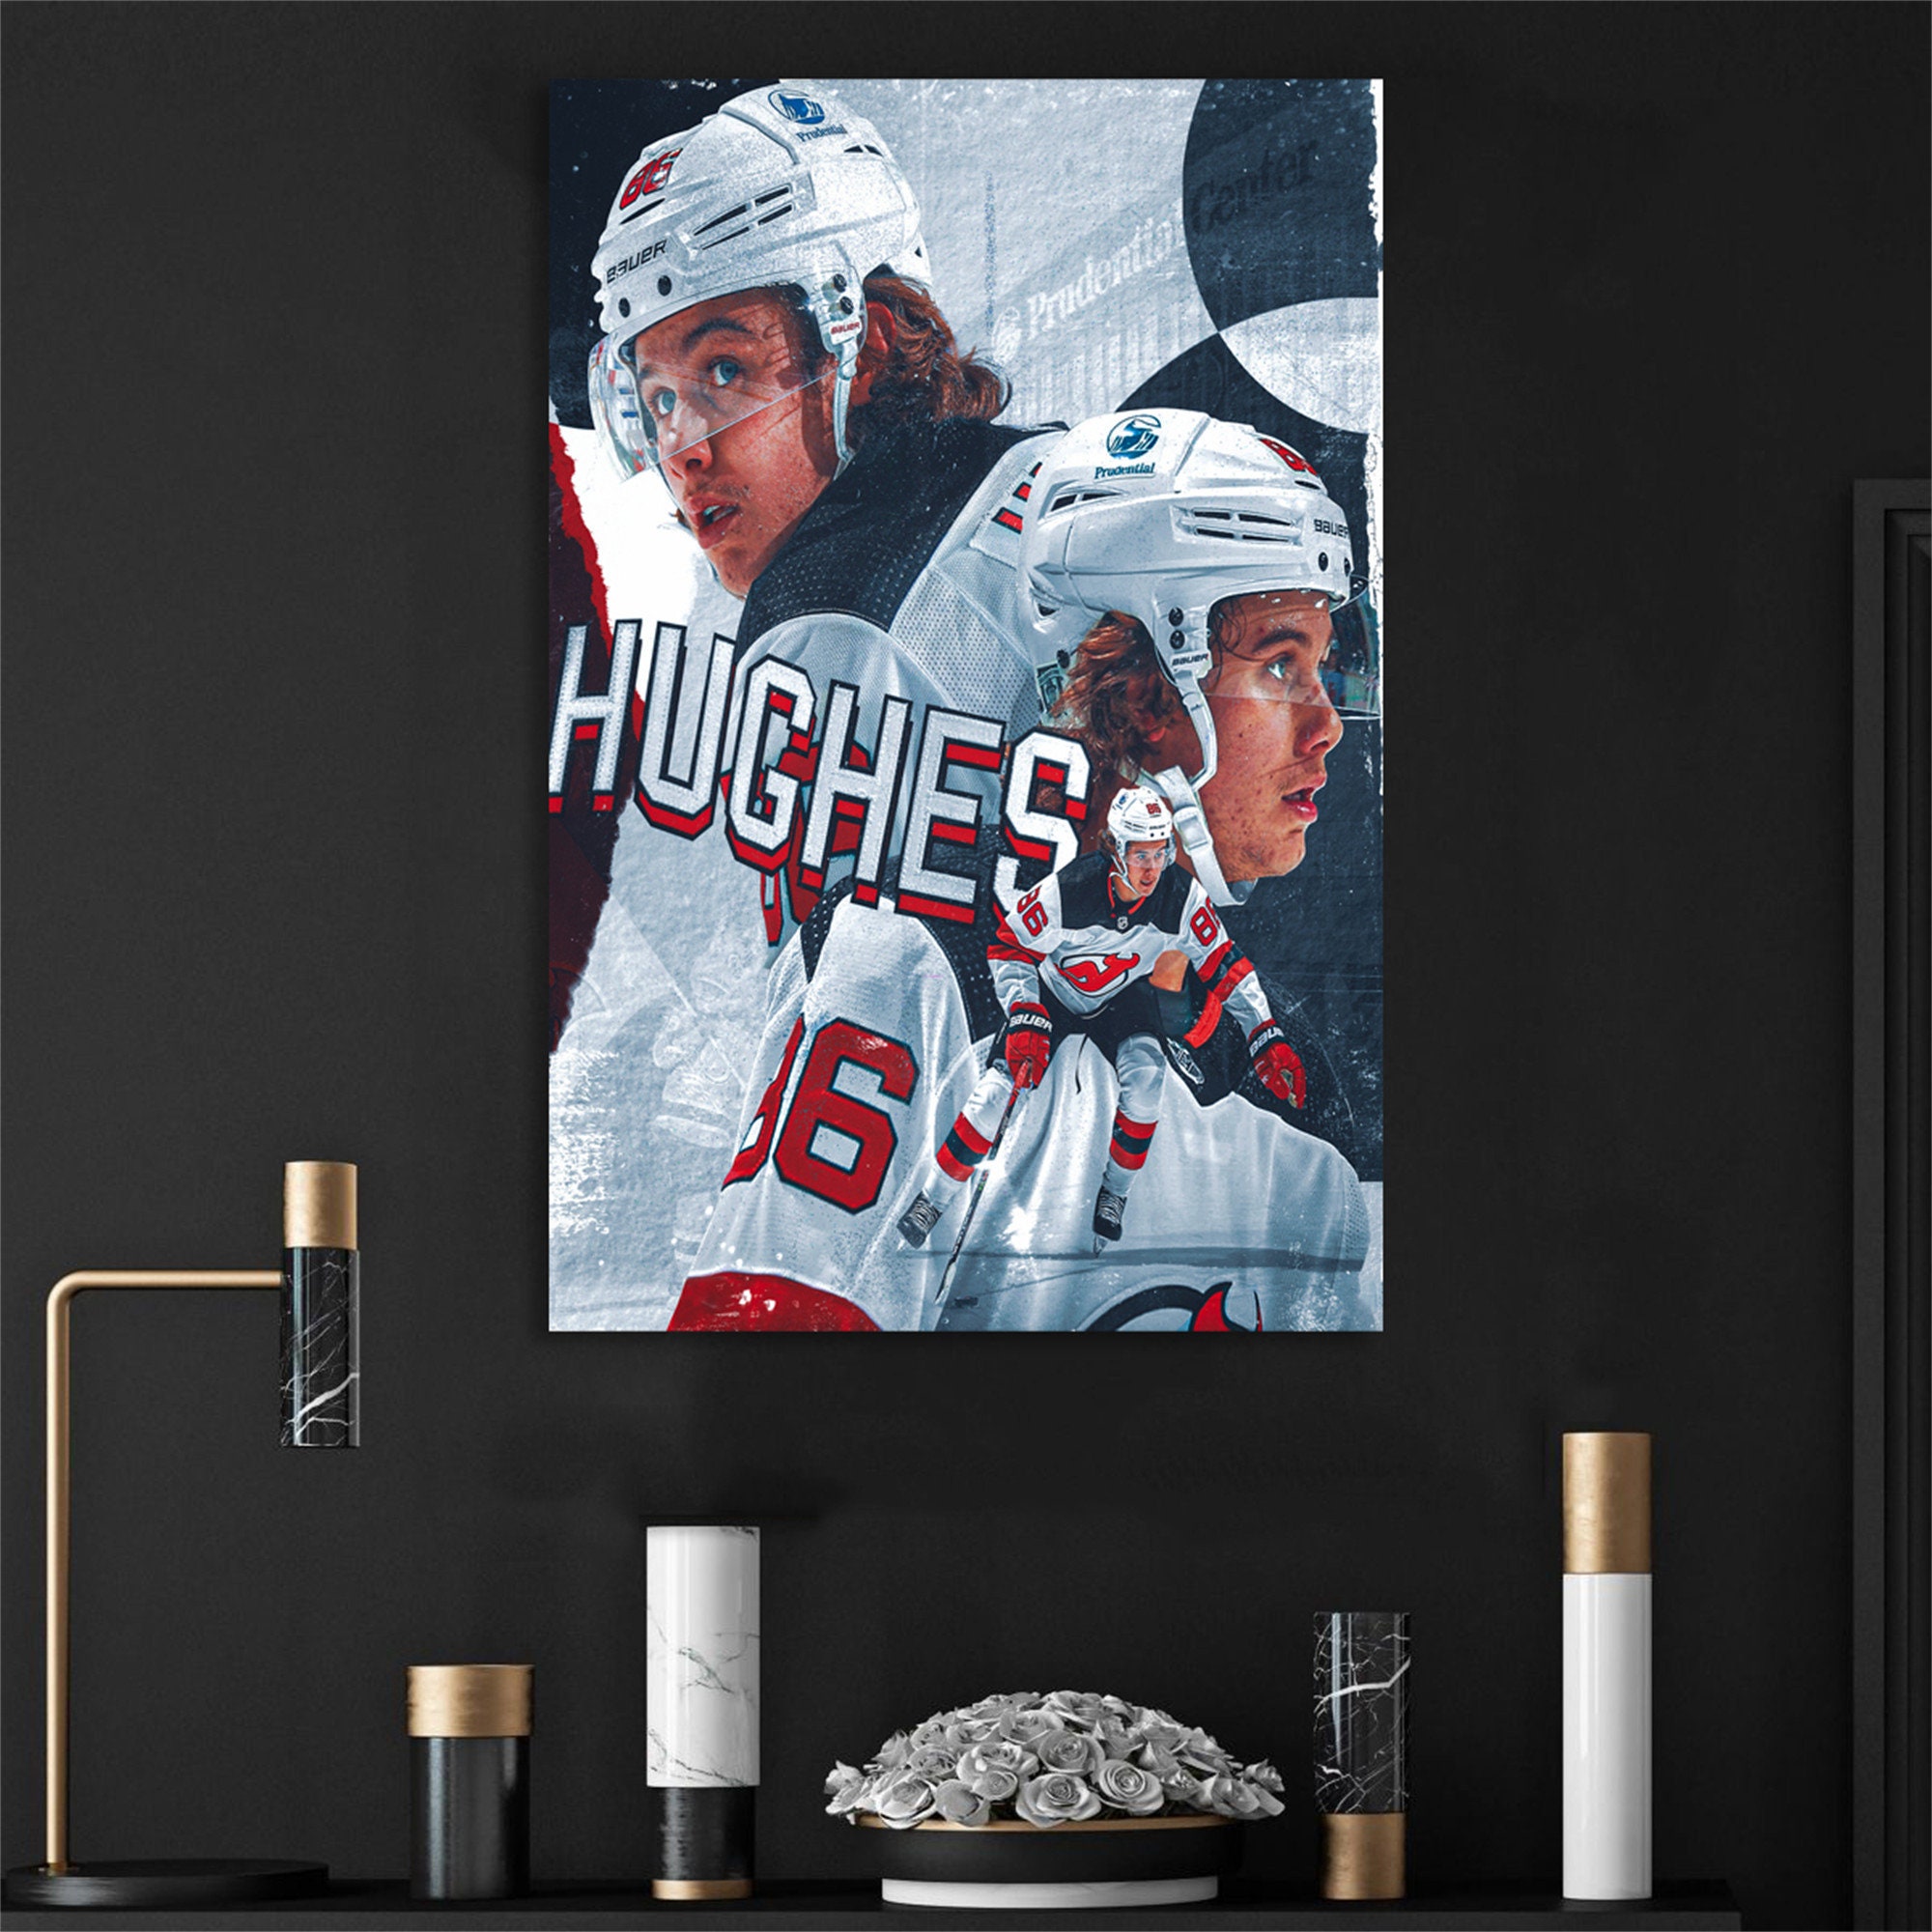 New Jersey Devils: Jack Hughes 2021 Poster - NHL Removable Adhesive Wall Decal Large